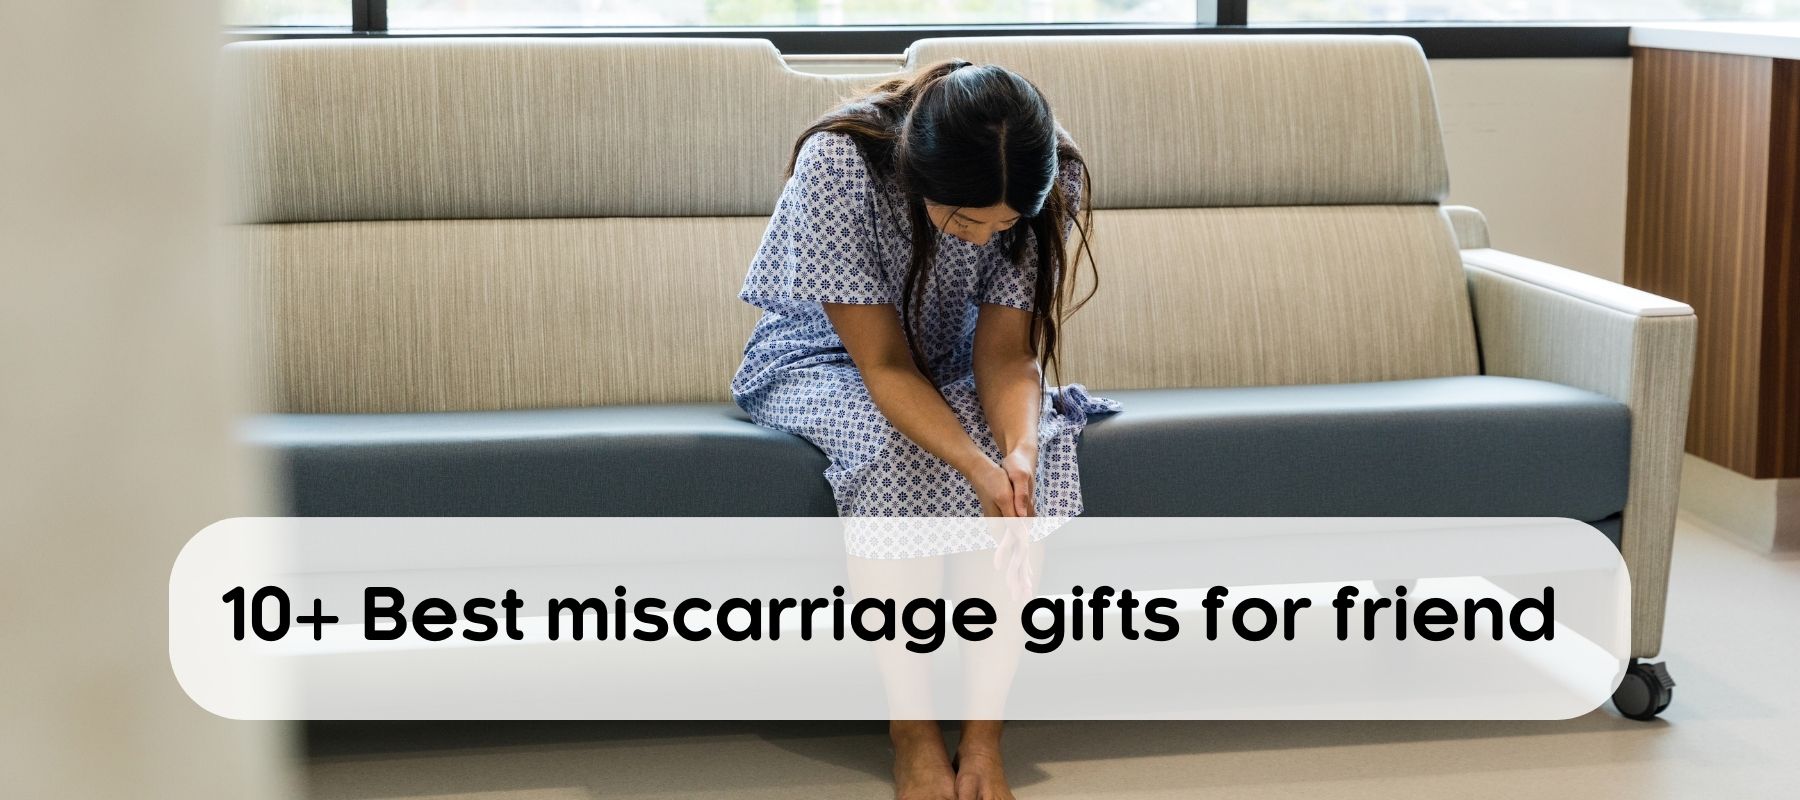 Miscarriage-gifts-for-friend